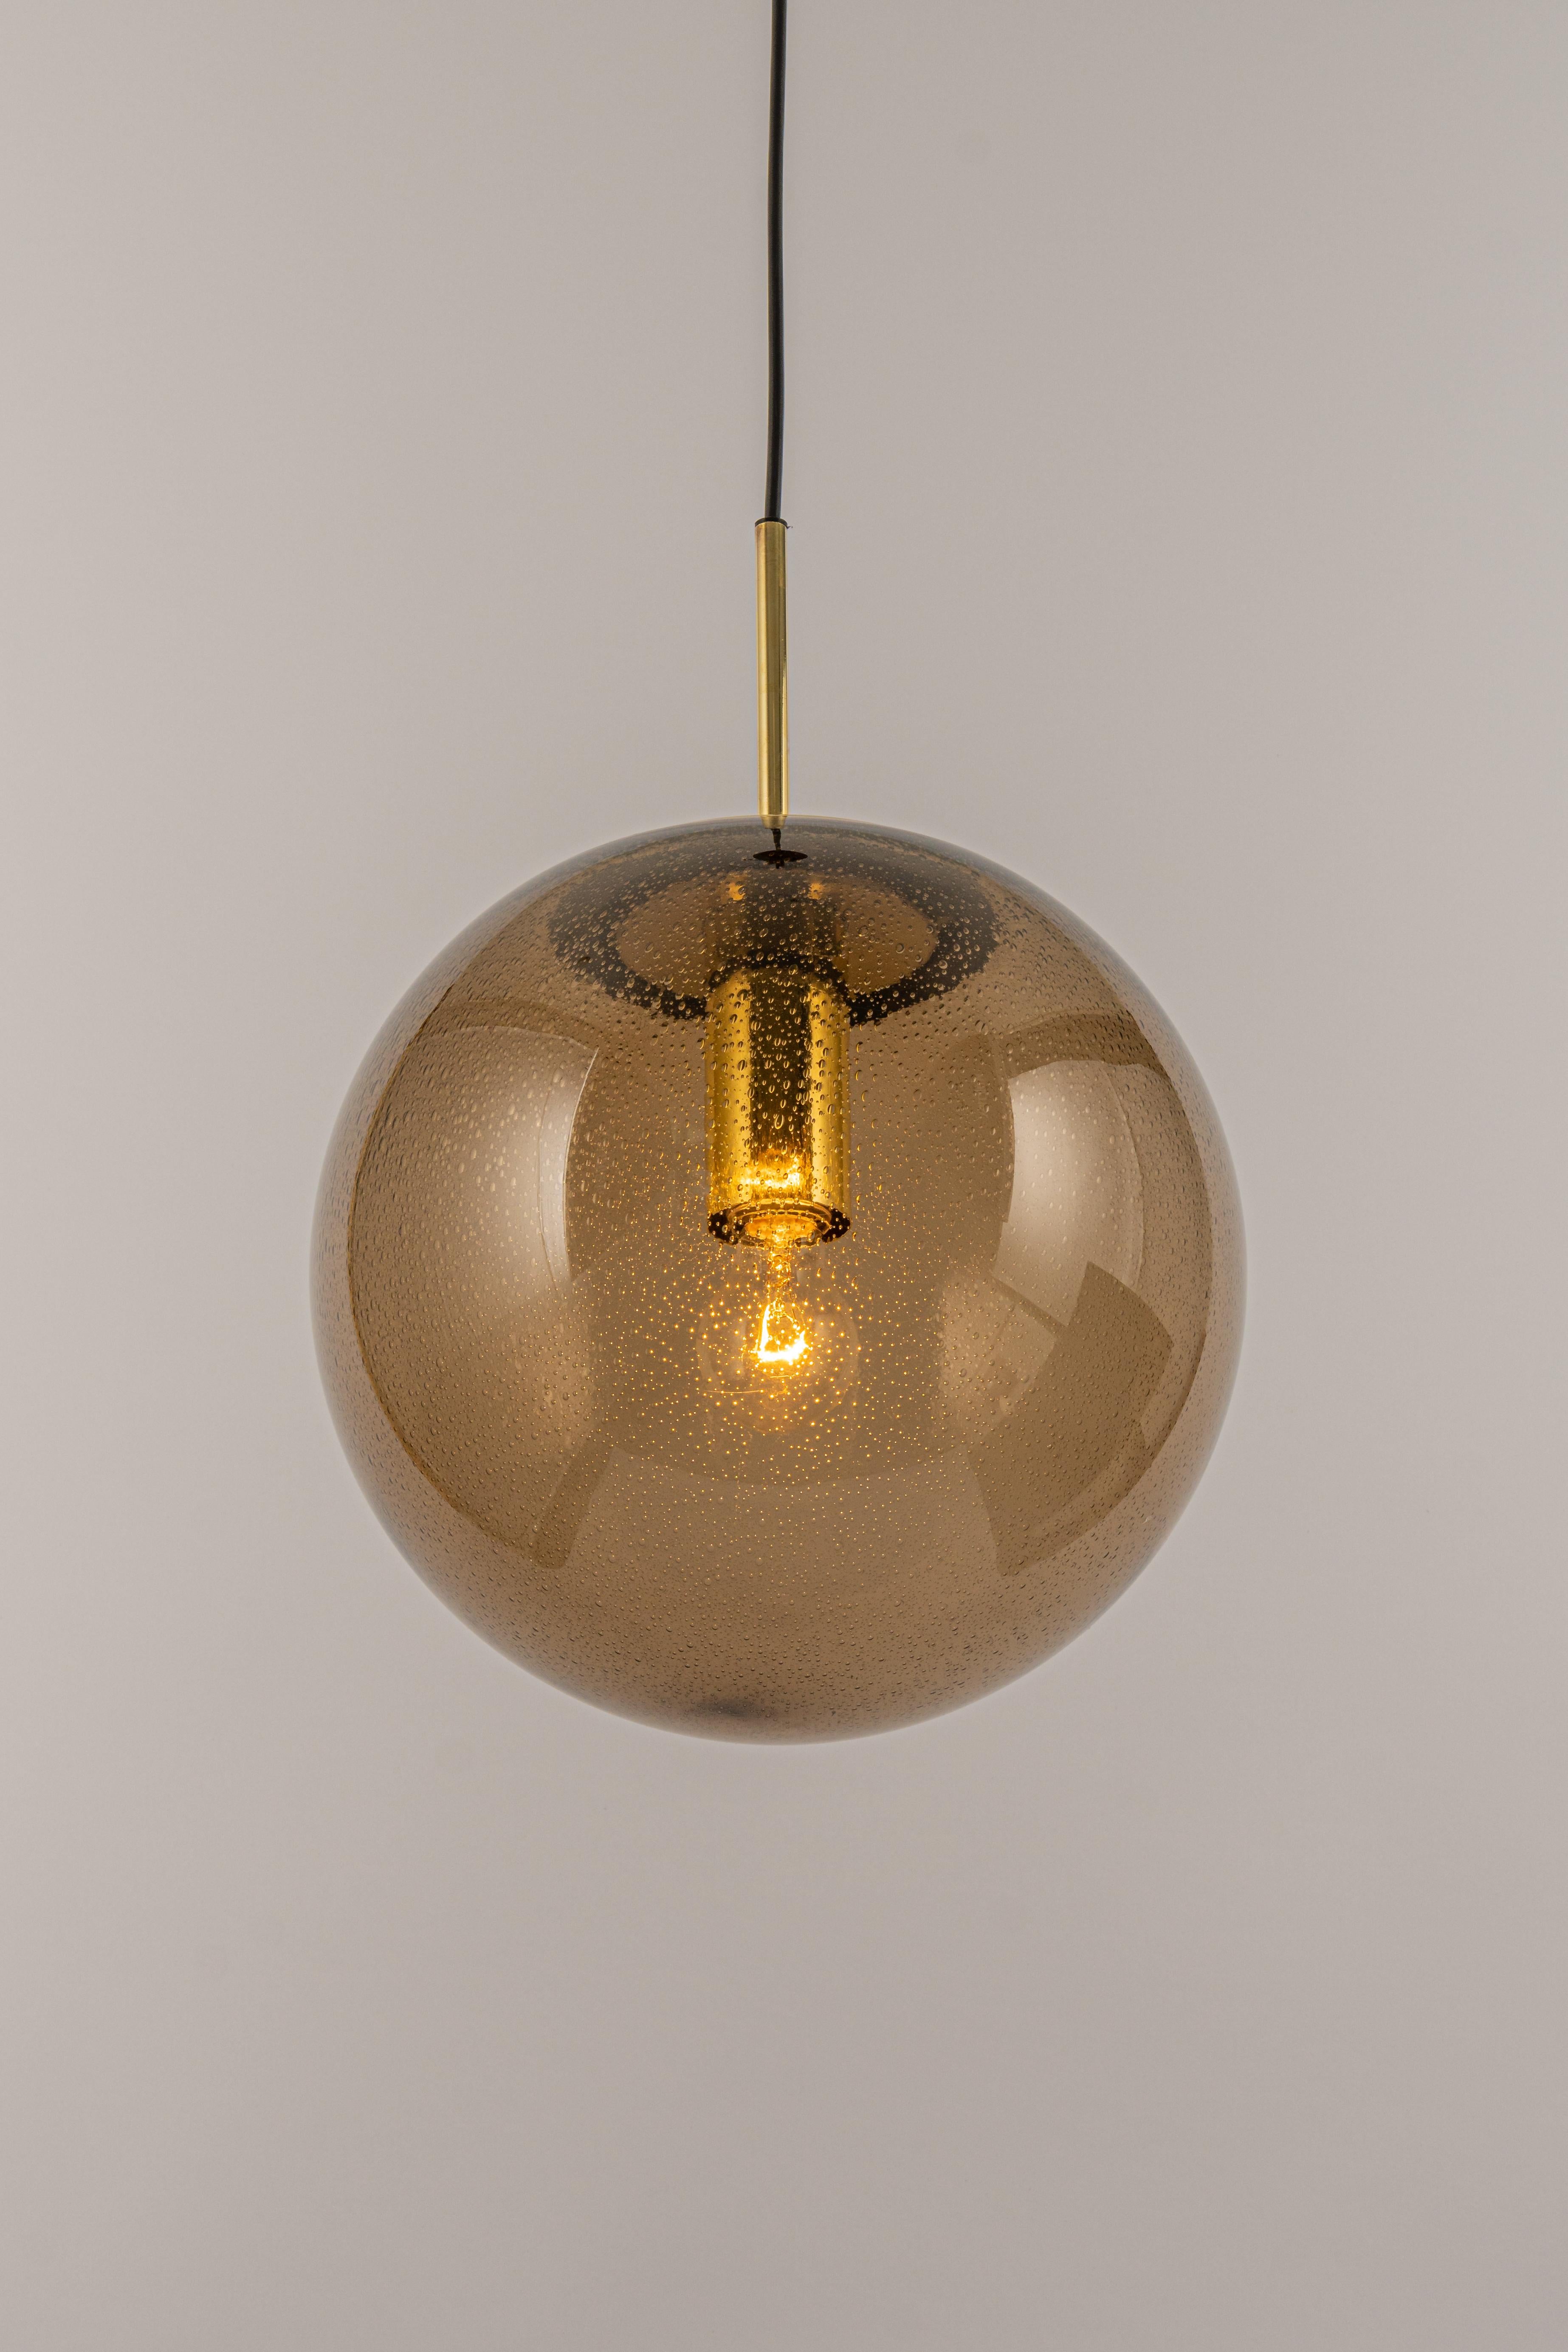 Large Limburg Brass with Smoked Glass Ball Pendant, Germany, 1970s For Sale 2